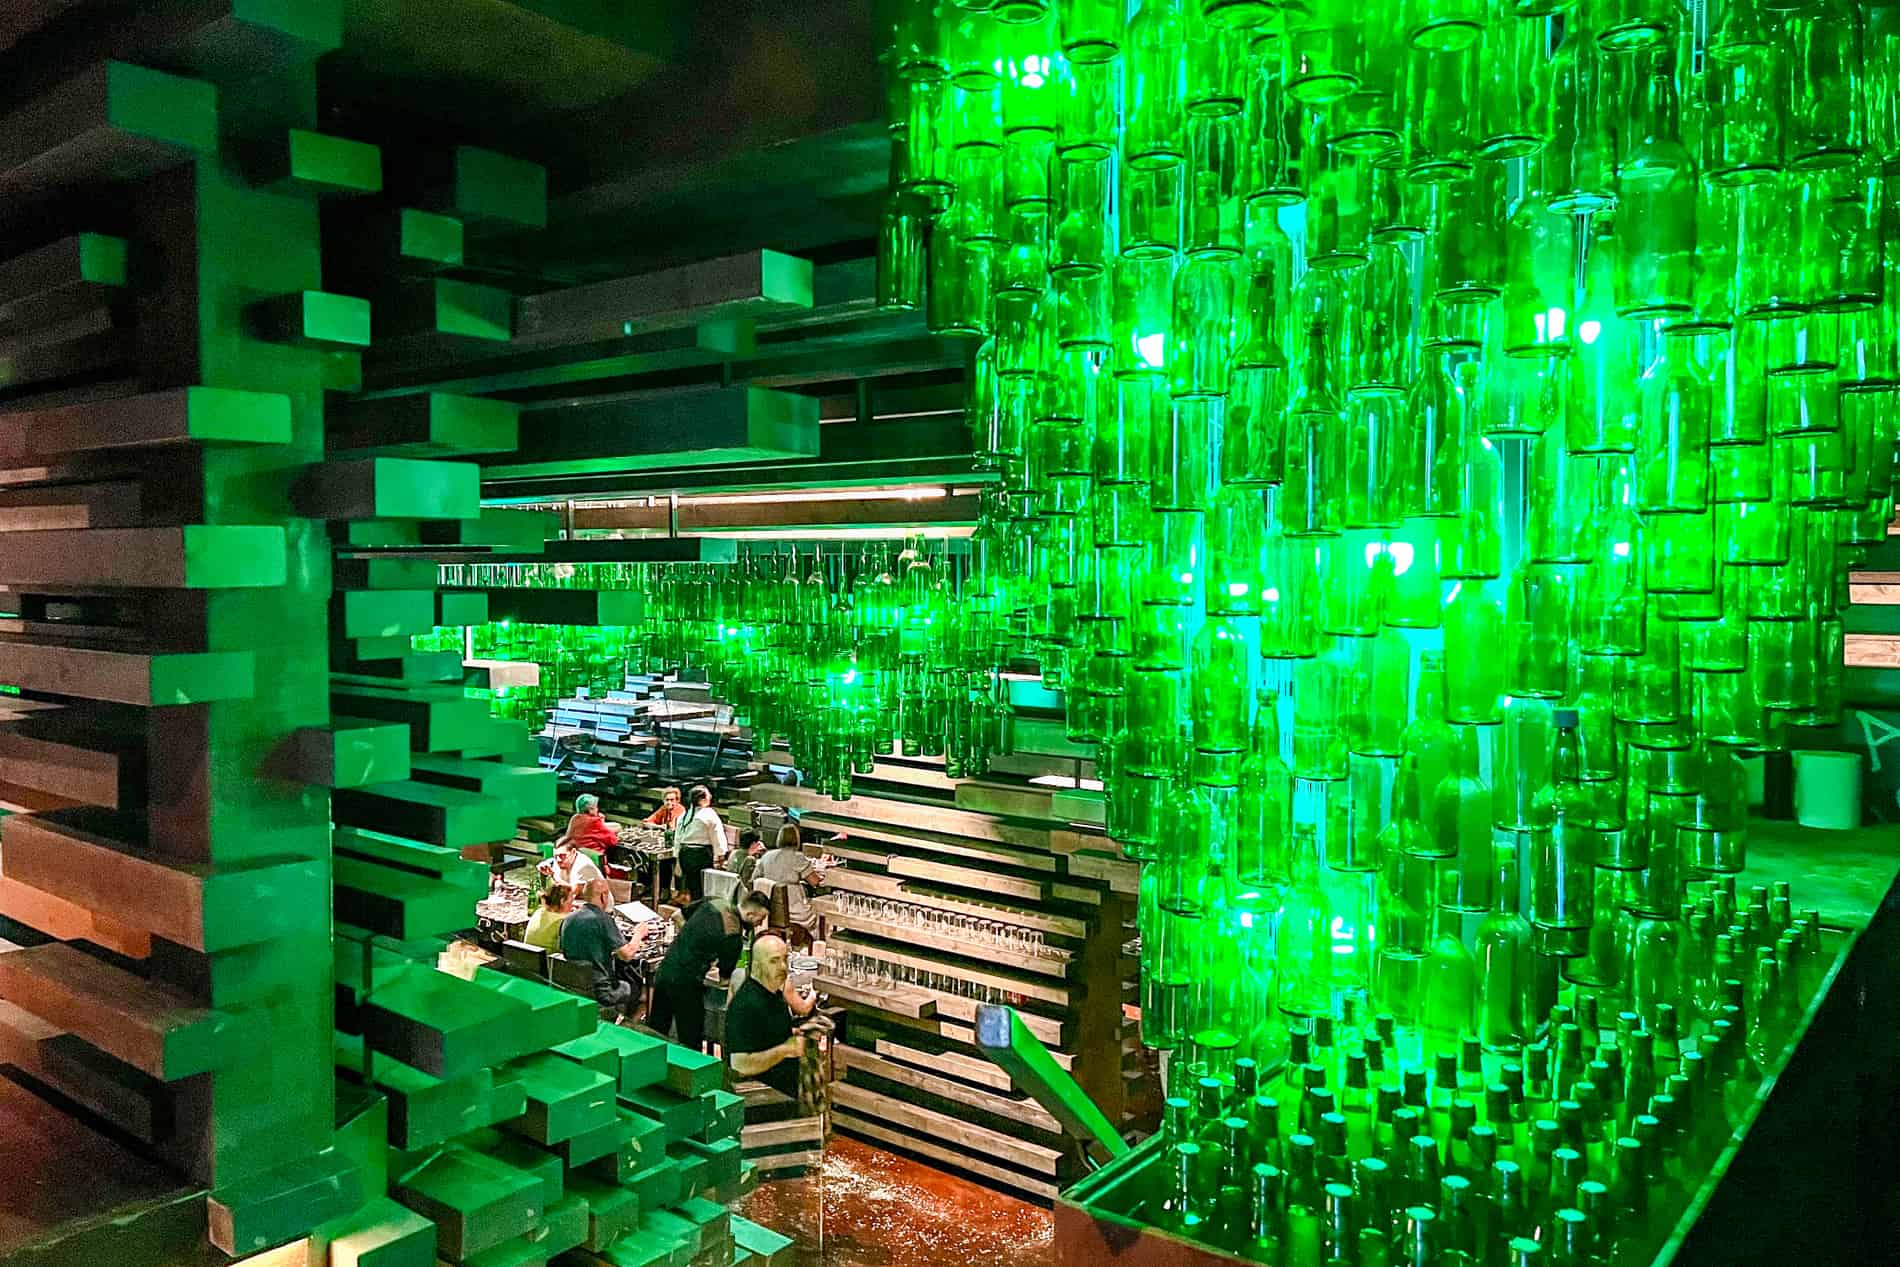 The Tierra Astur cider bar in Oviedo, with an interior of wooden panels and hundreds of hanging green glass cider bottles. 